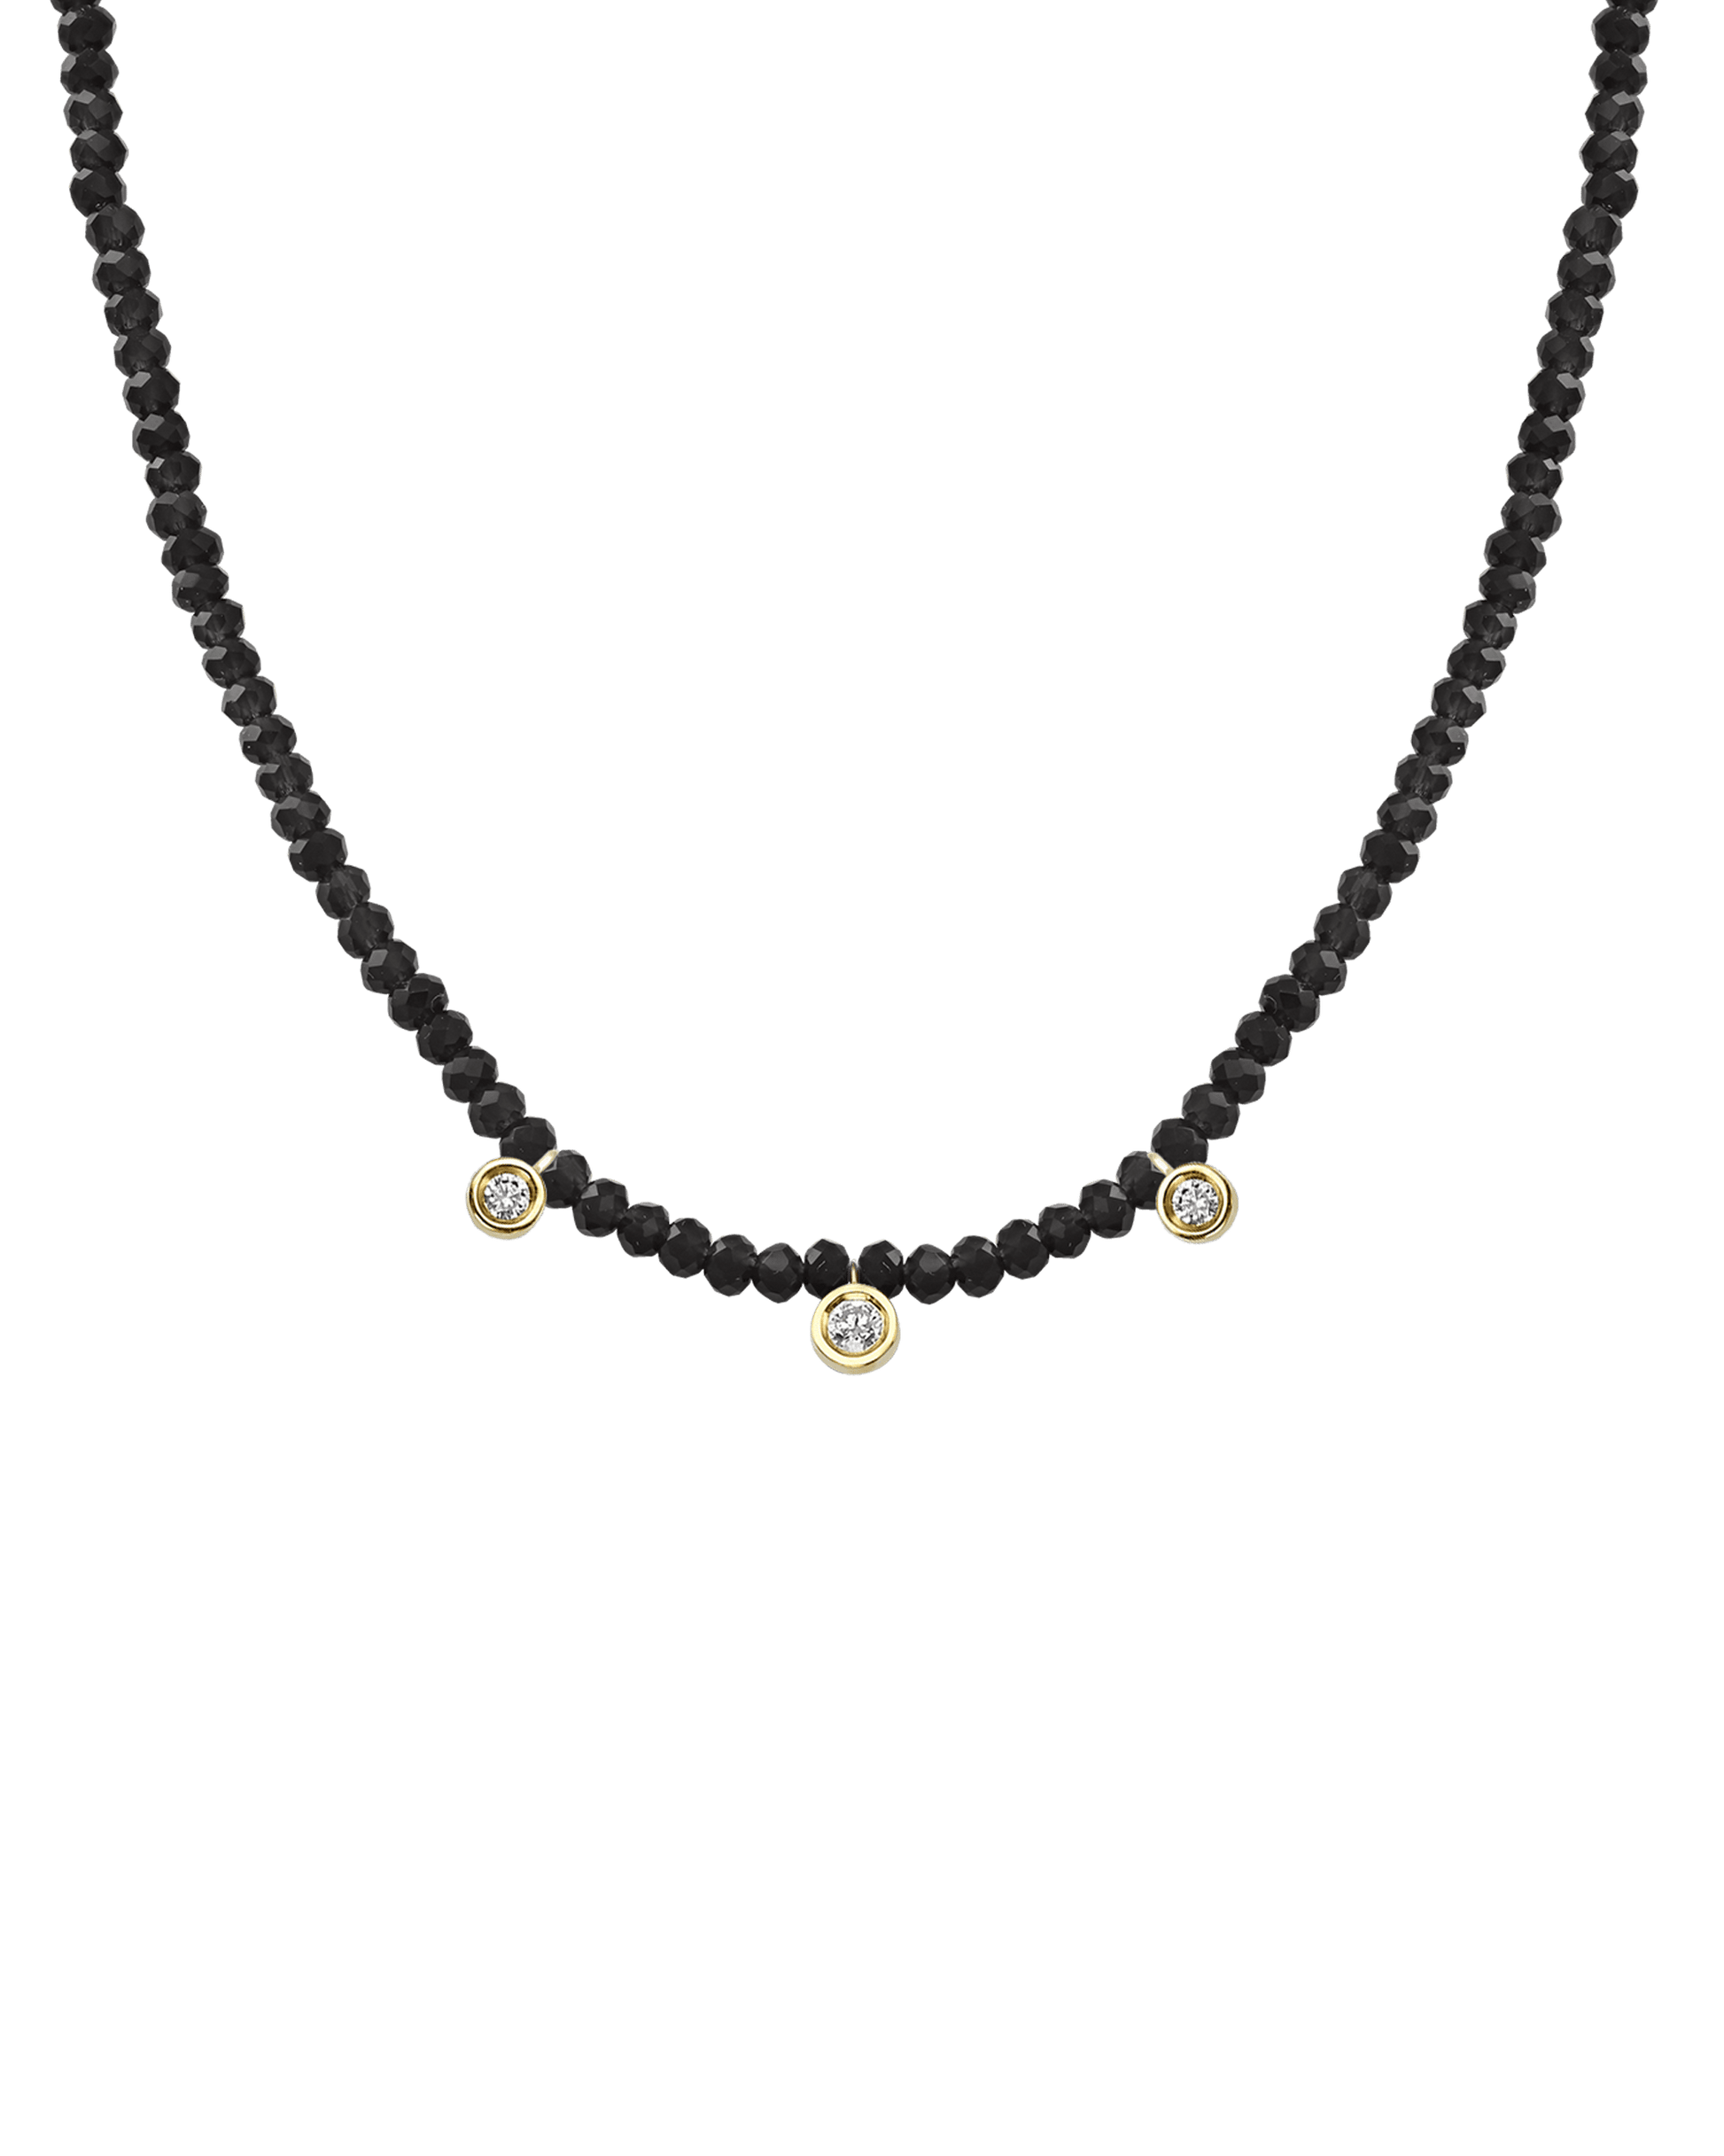 Emerald Gemstone & Three diamonds Necklace - 14K Yellow Gold Necklaces magal-dev Glass Beads Black Spinnel 14" - Collar 